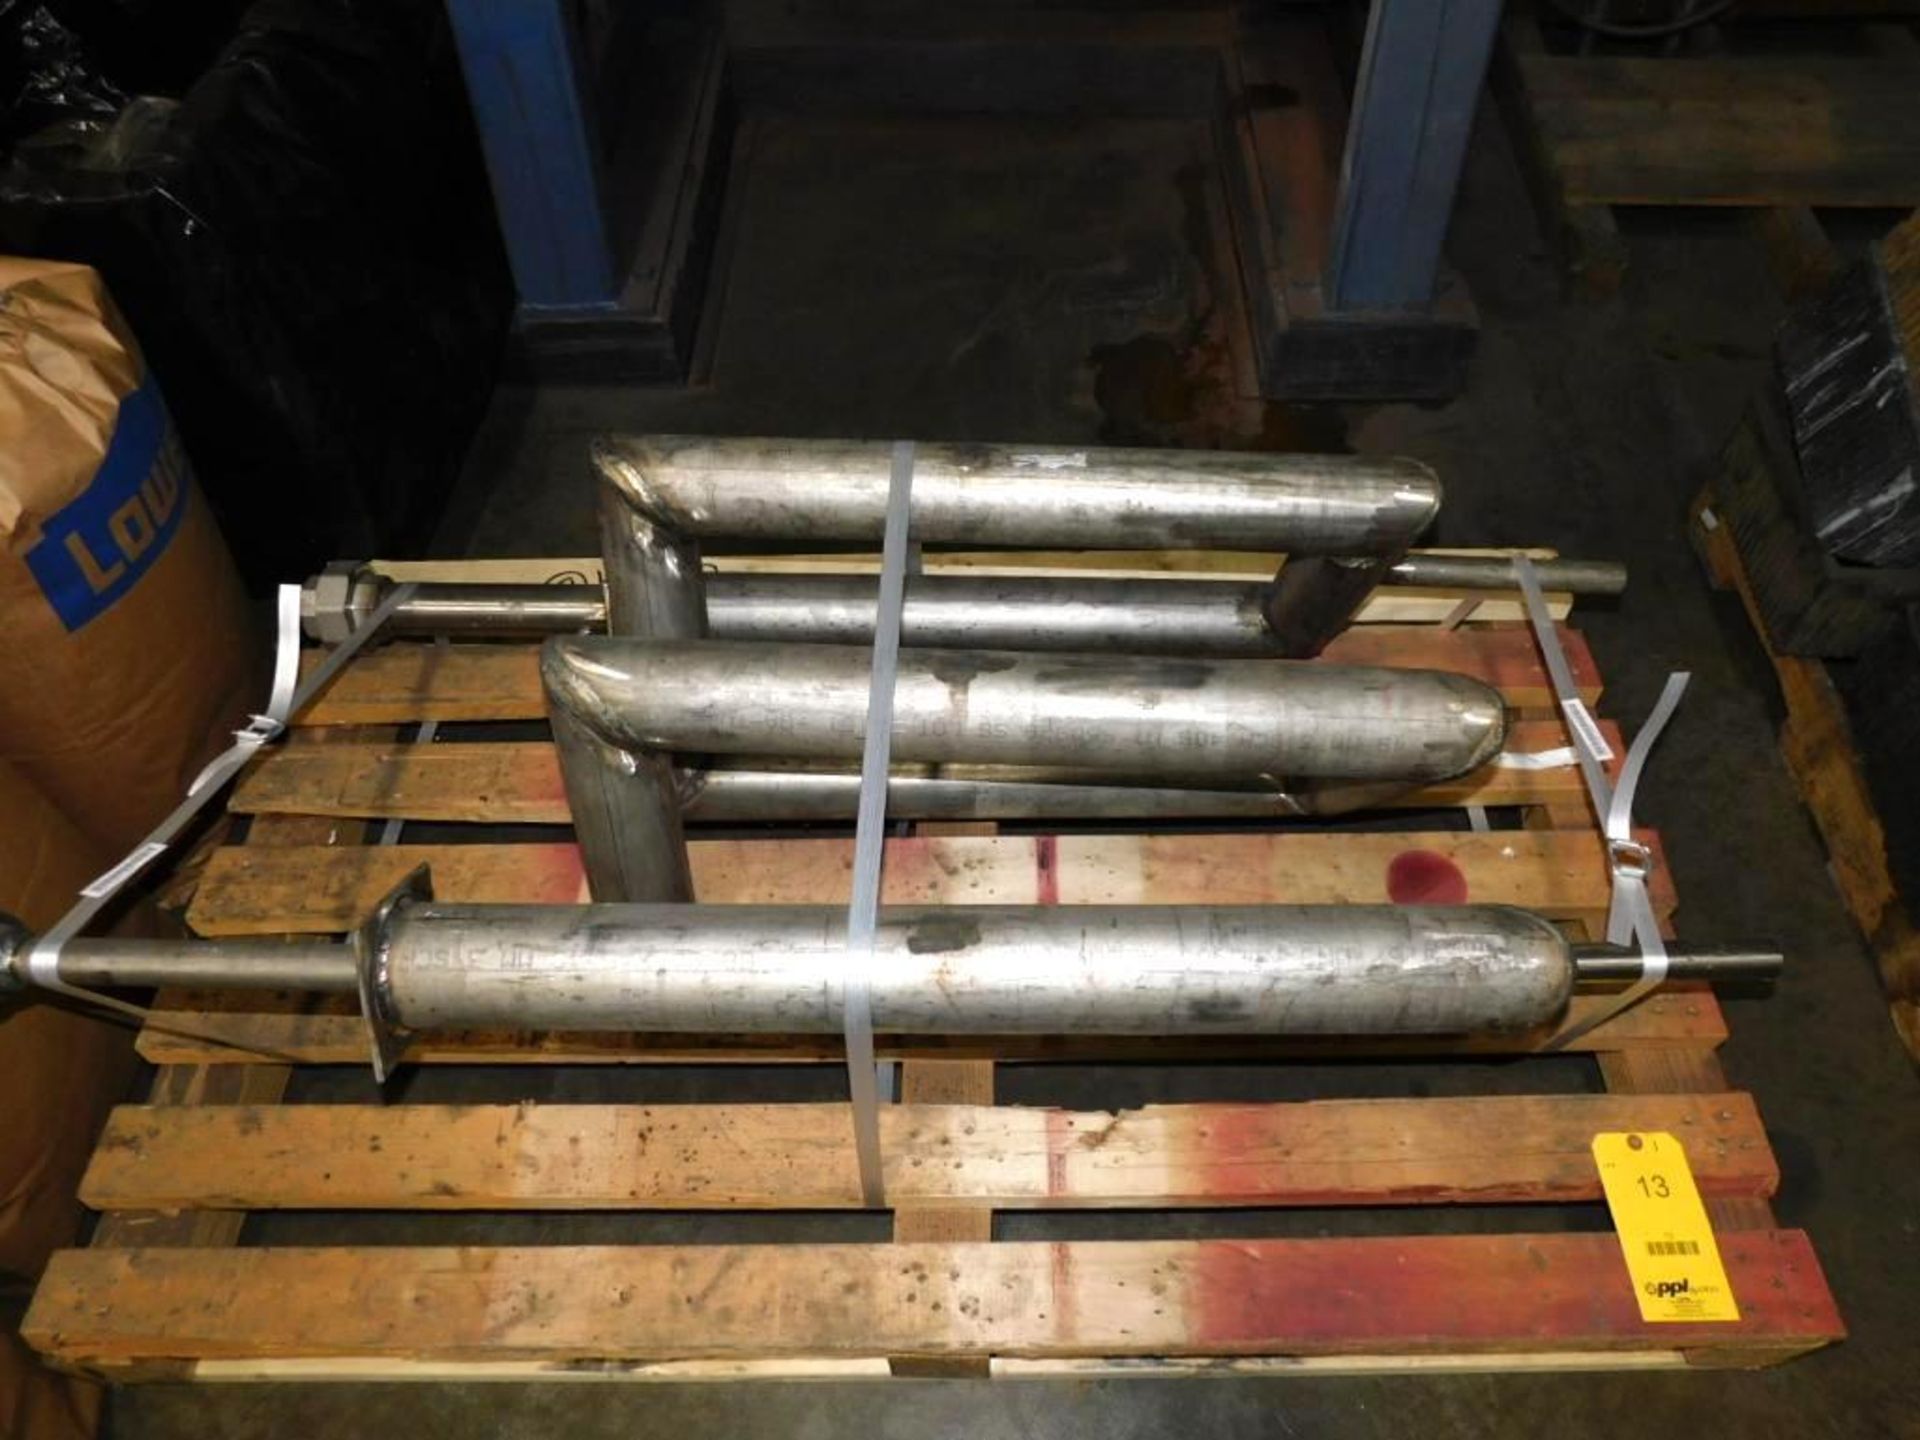 New Retort for CI Hayes Ammonia Dissociator described in Lot 12, Inconel Construction, Recently purc - Image 2 of 9